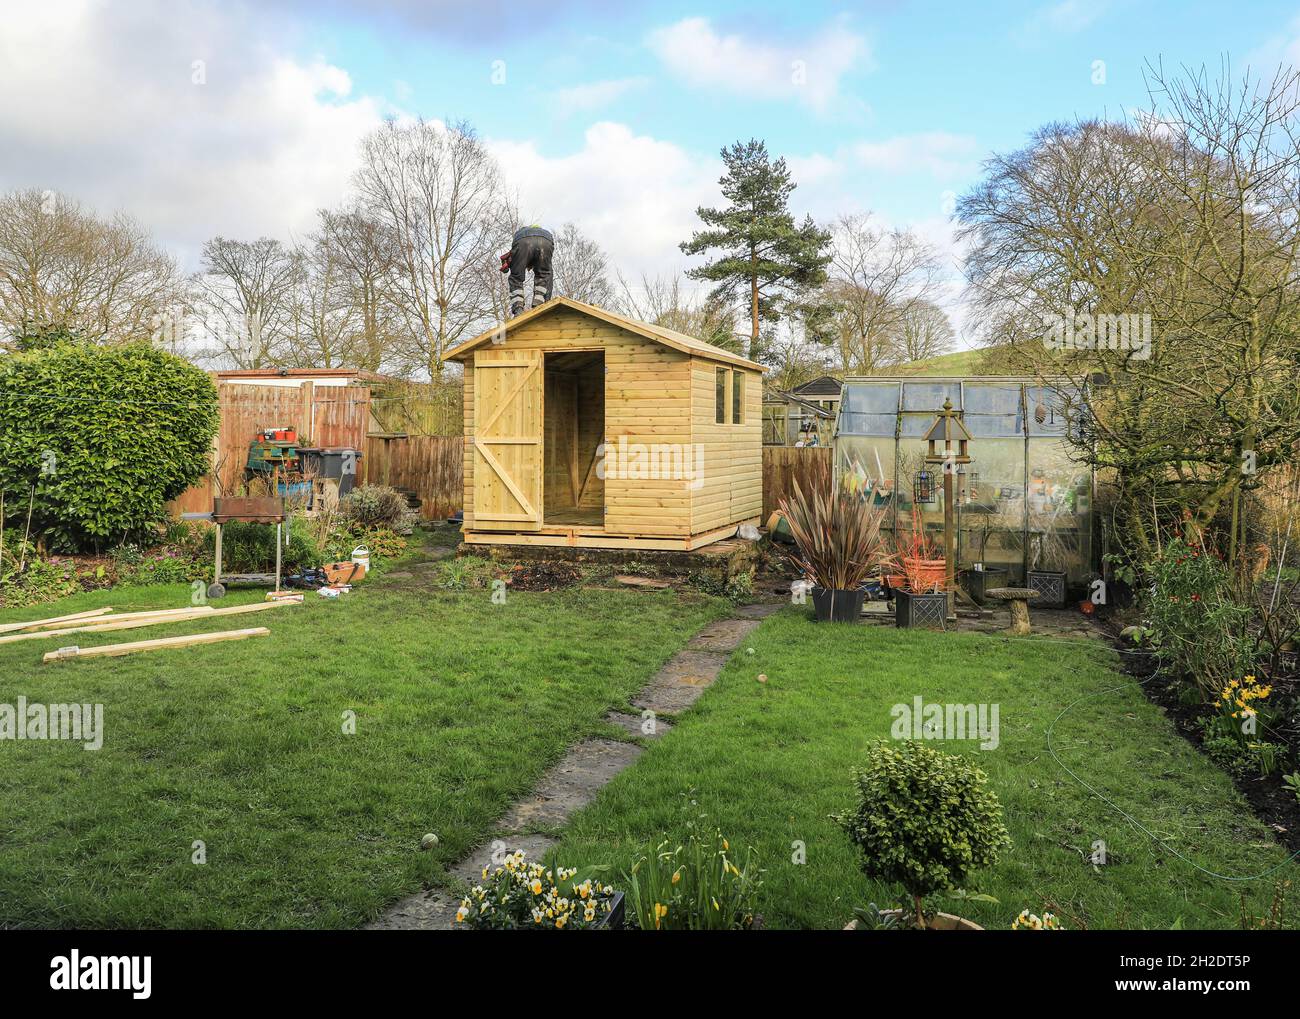 Workers from Solid Sheds Ltd erecting a wooden shed in a domestic garden, Stoke on Trent, Staffordshire, England, UK. Photo number 7 in a series of 8 Stock Photo